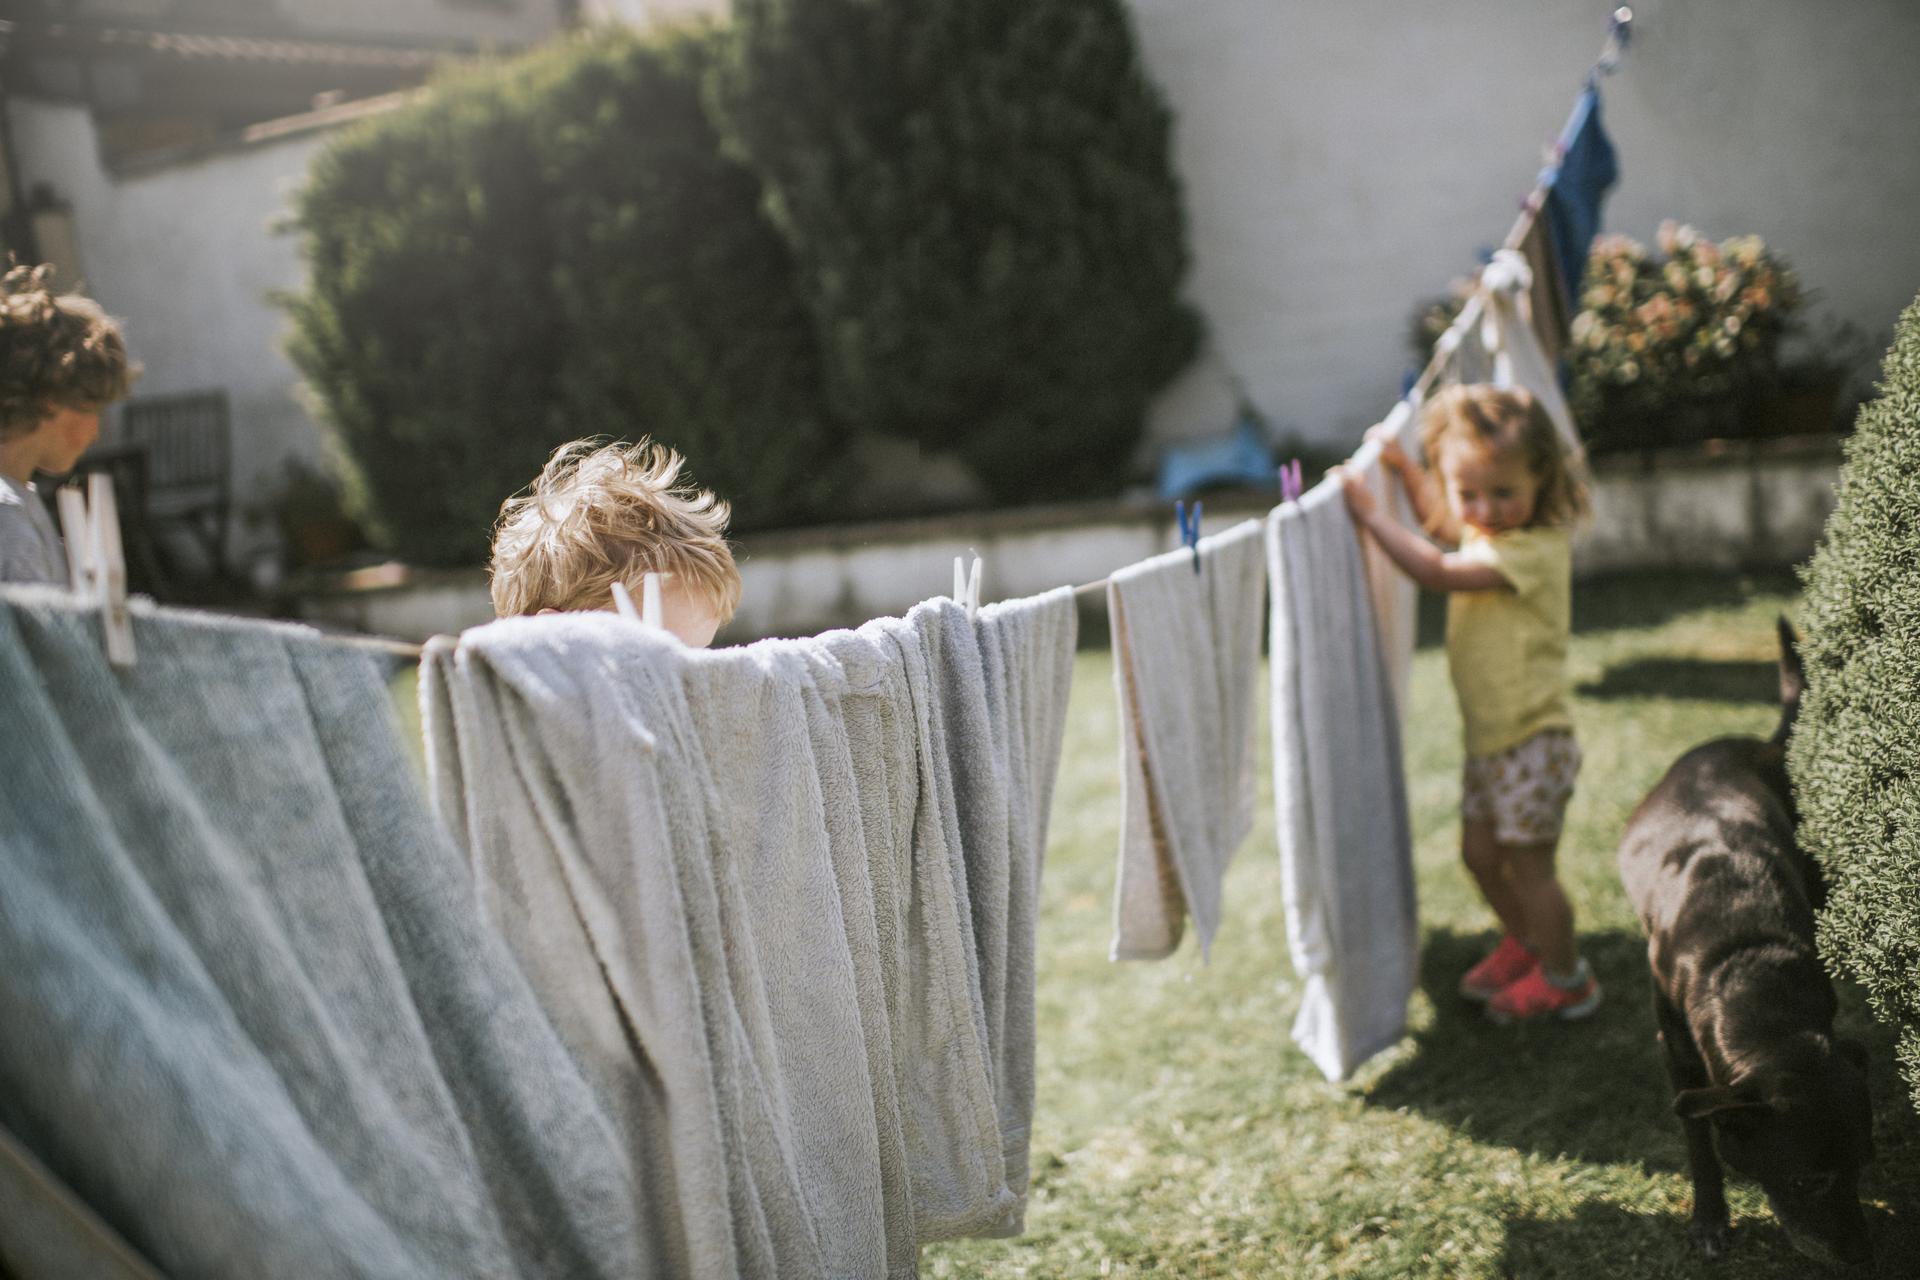 In joyful expectation - On a clothesline hangs freshly washed baby